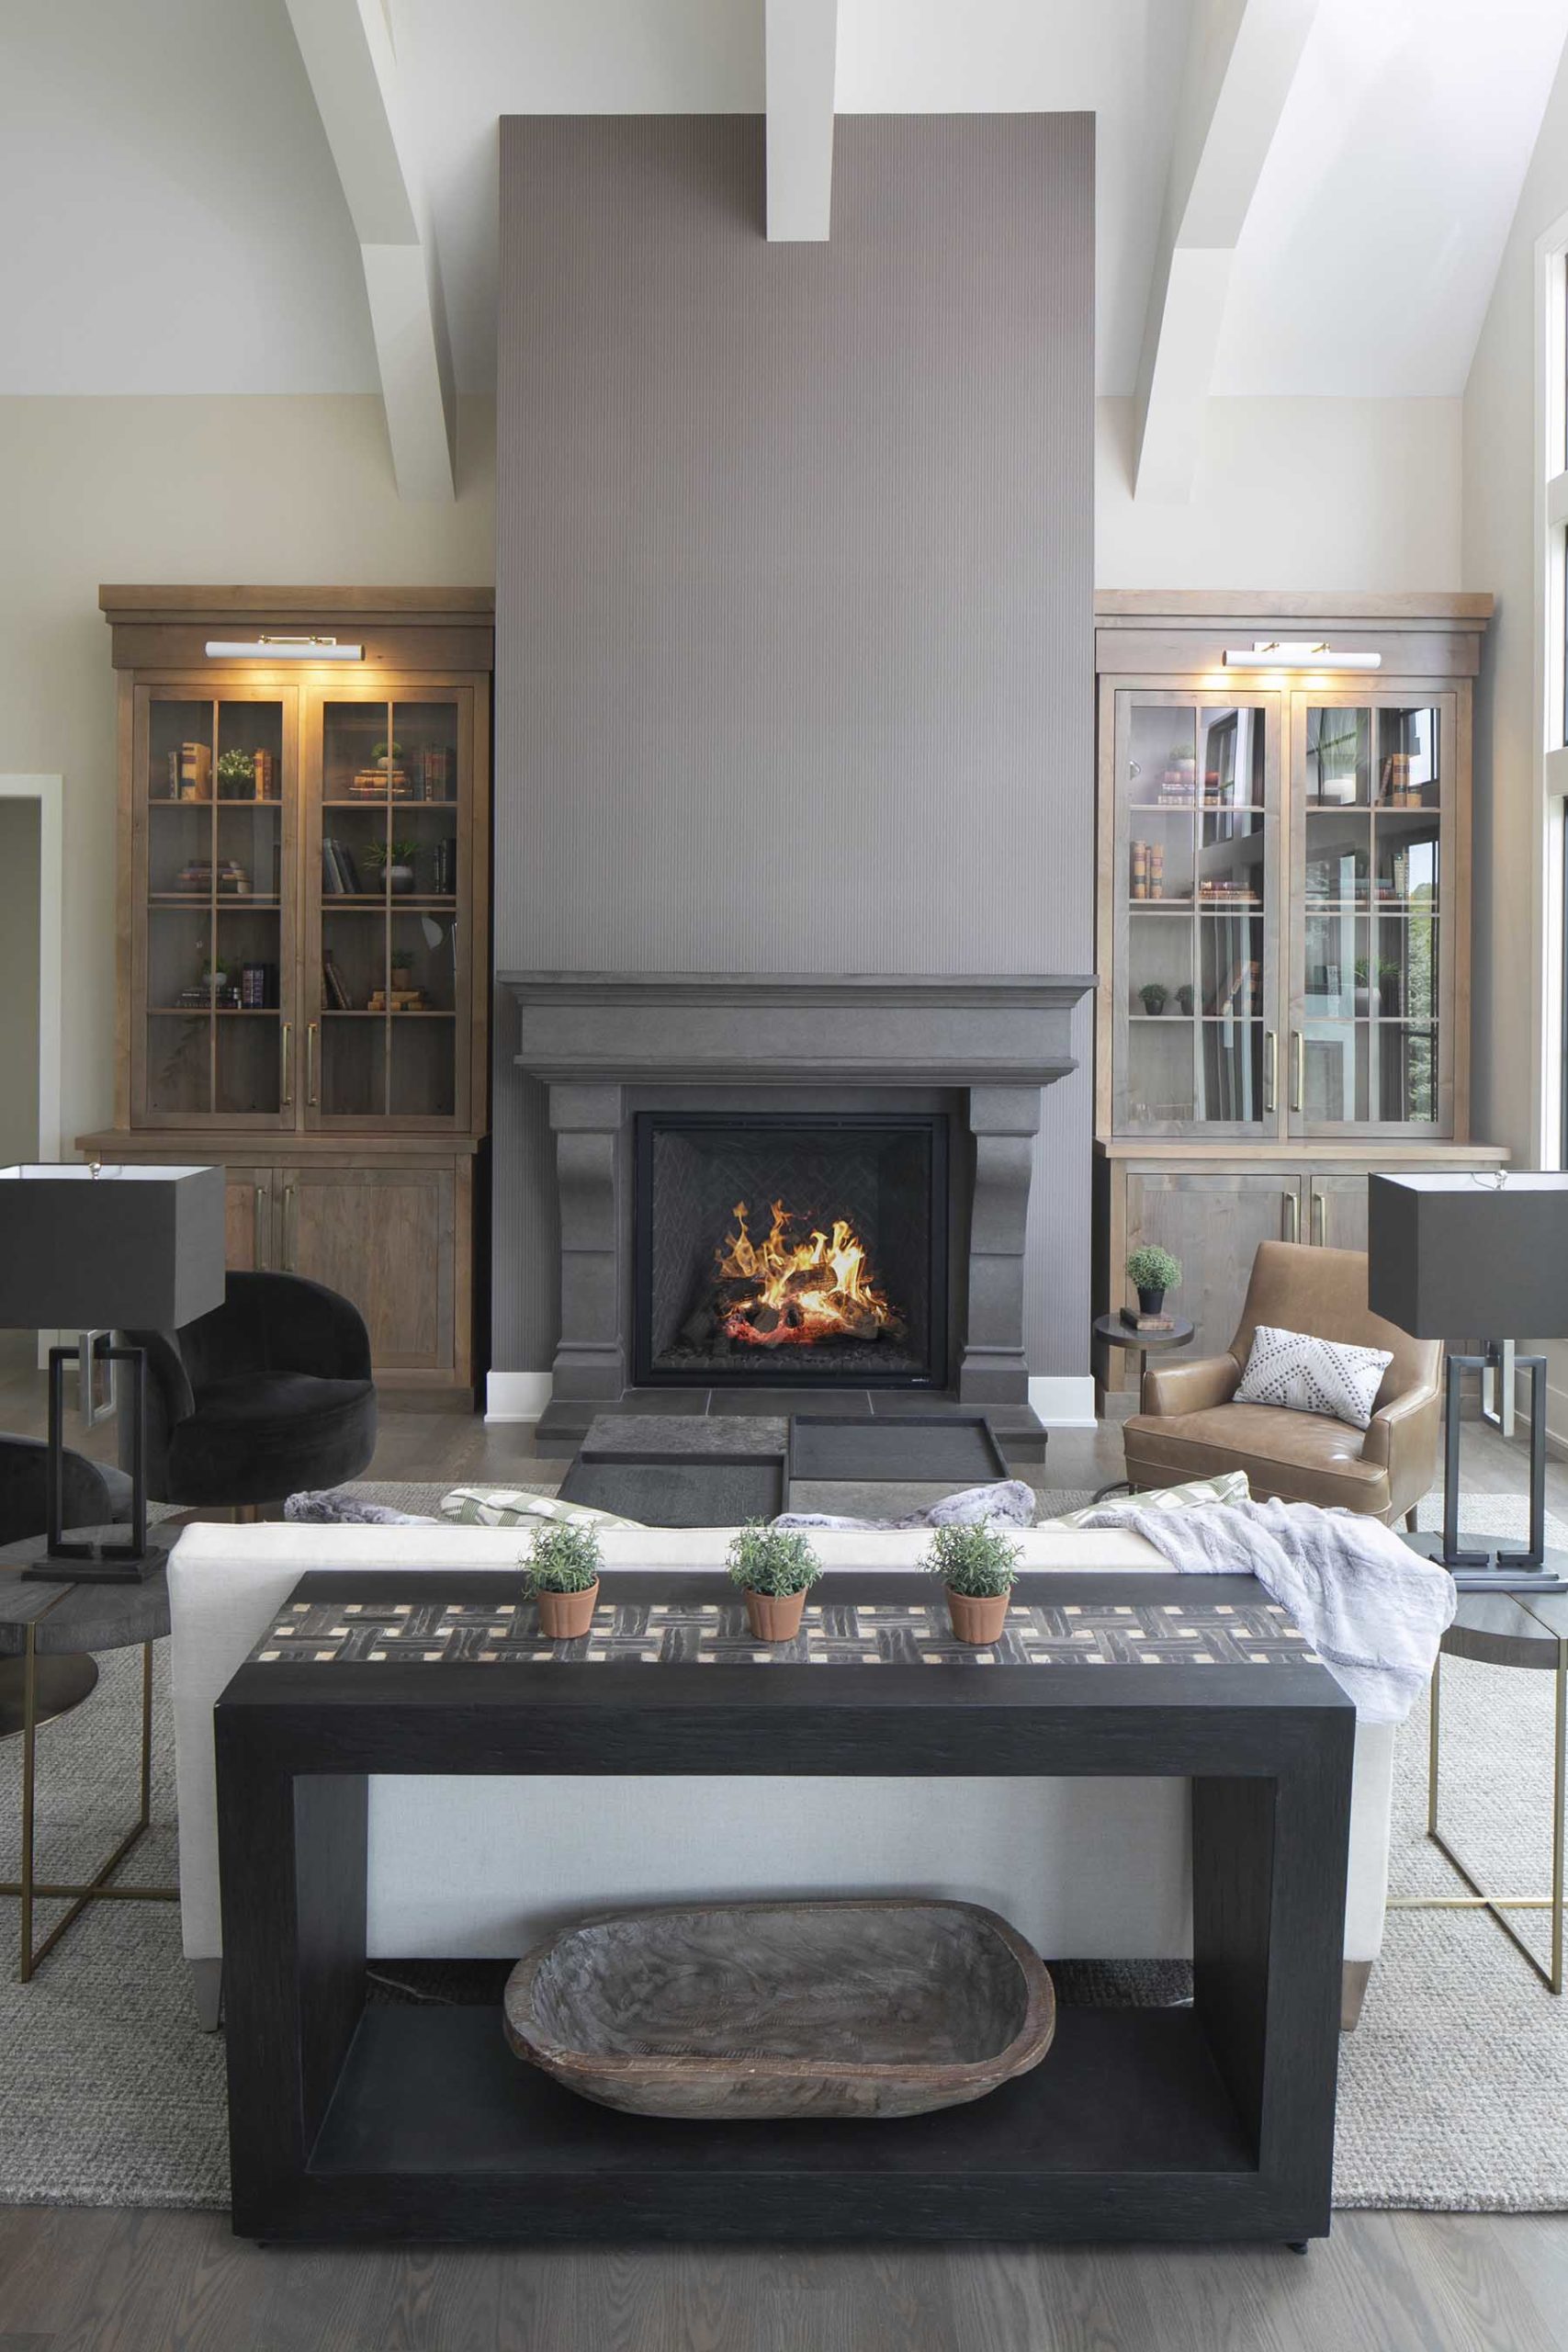 A living room with a fireplace and bookshelves.